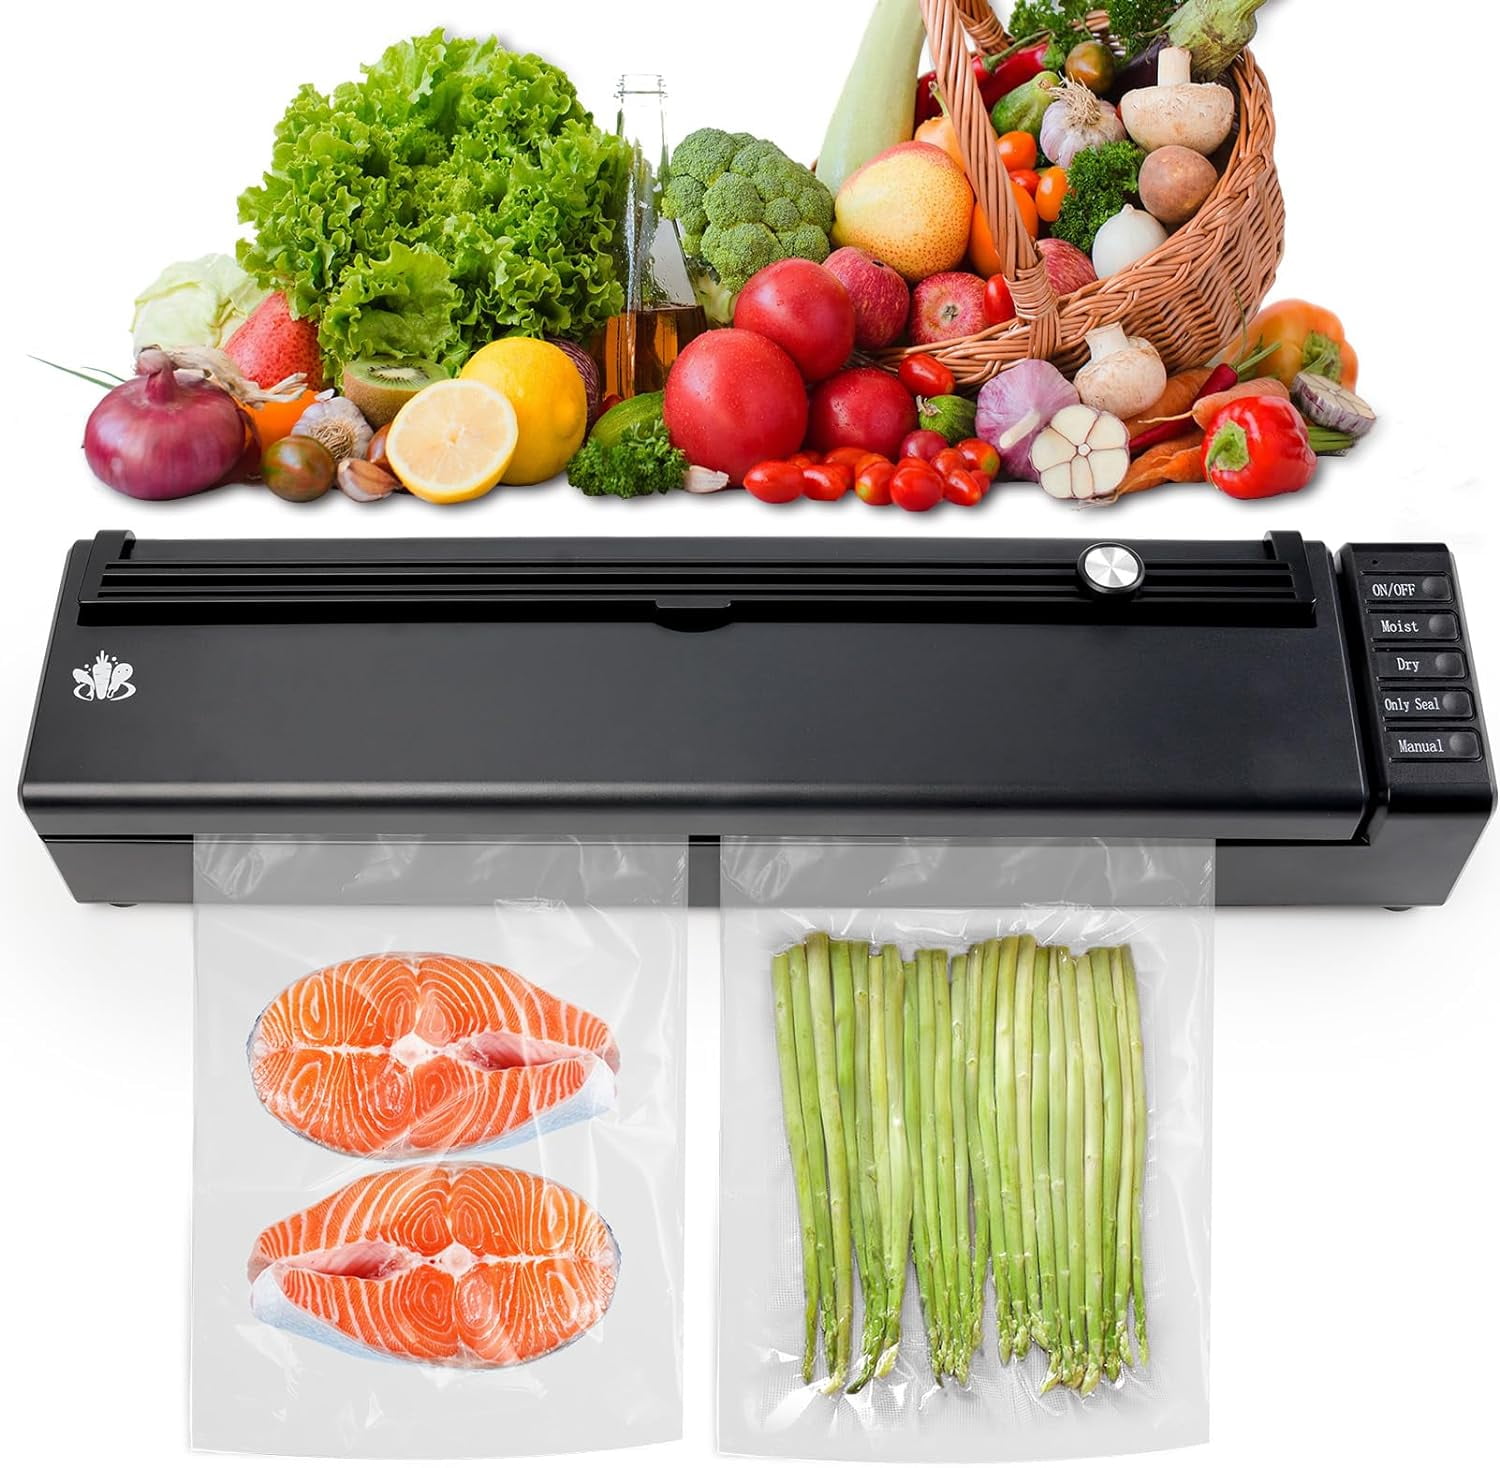 Vacuum Sealer Machine, Cordless Rechargeable Food Vacuum Sealer for  Dry/Moist Food Storage and Sous Vide, With Strong Vacuum and Complete Seal,  With Bag Cutter and 10 Vacuum Bags 